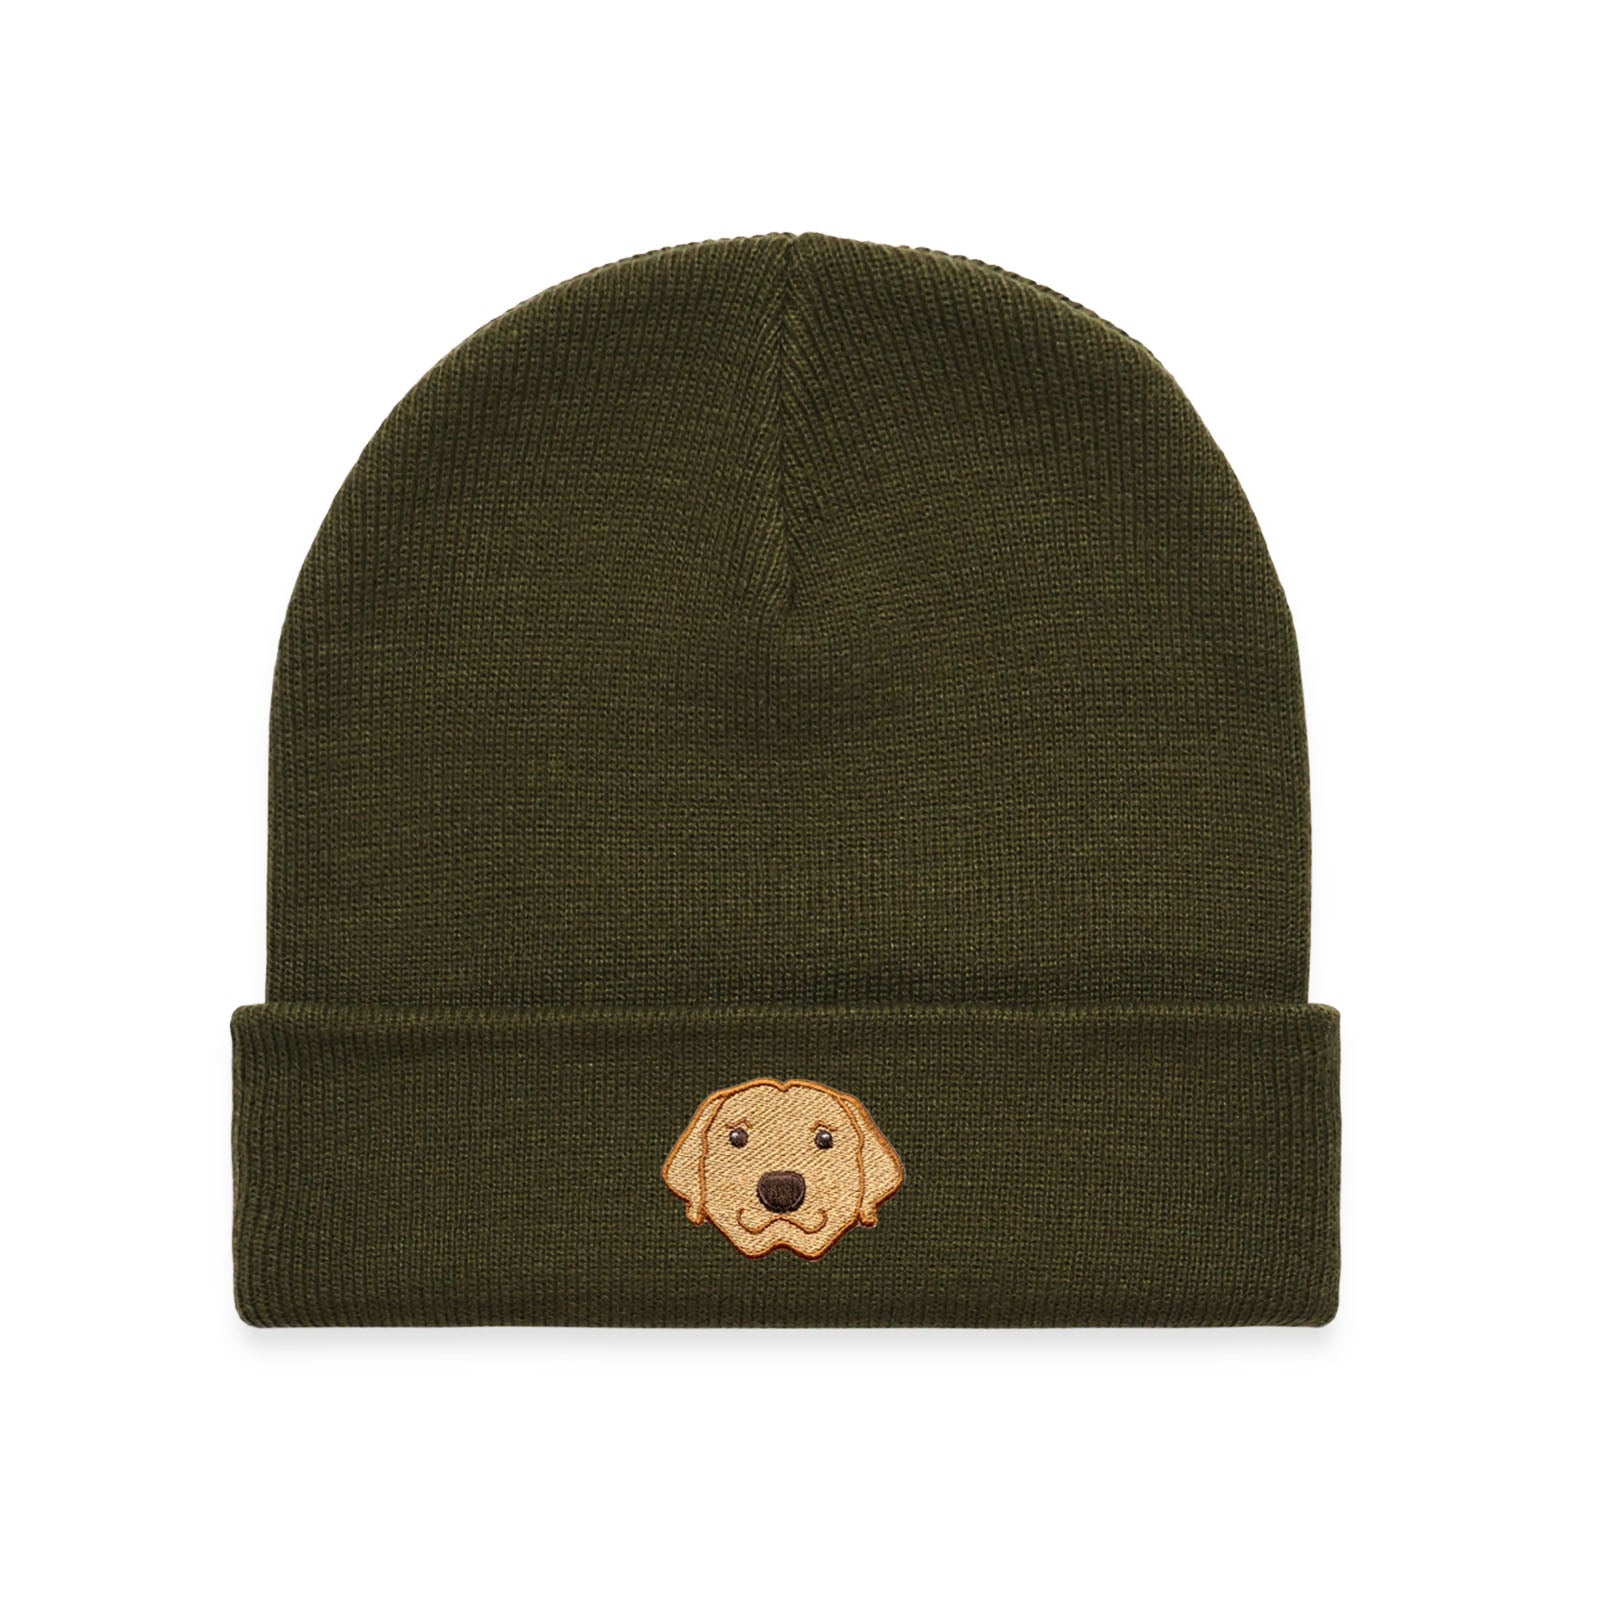 Army green custom dog cuff beanie personalized and embroidered on the front.